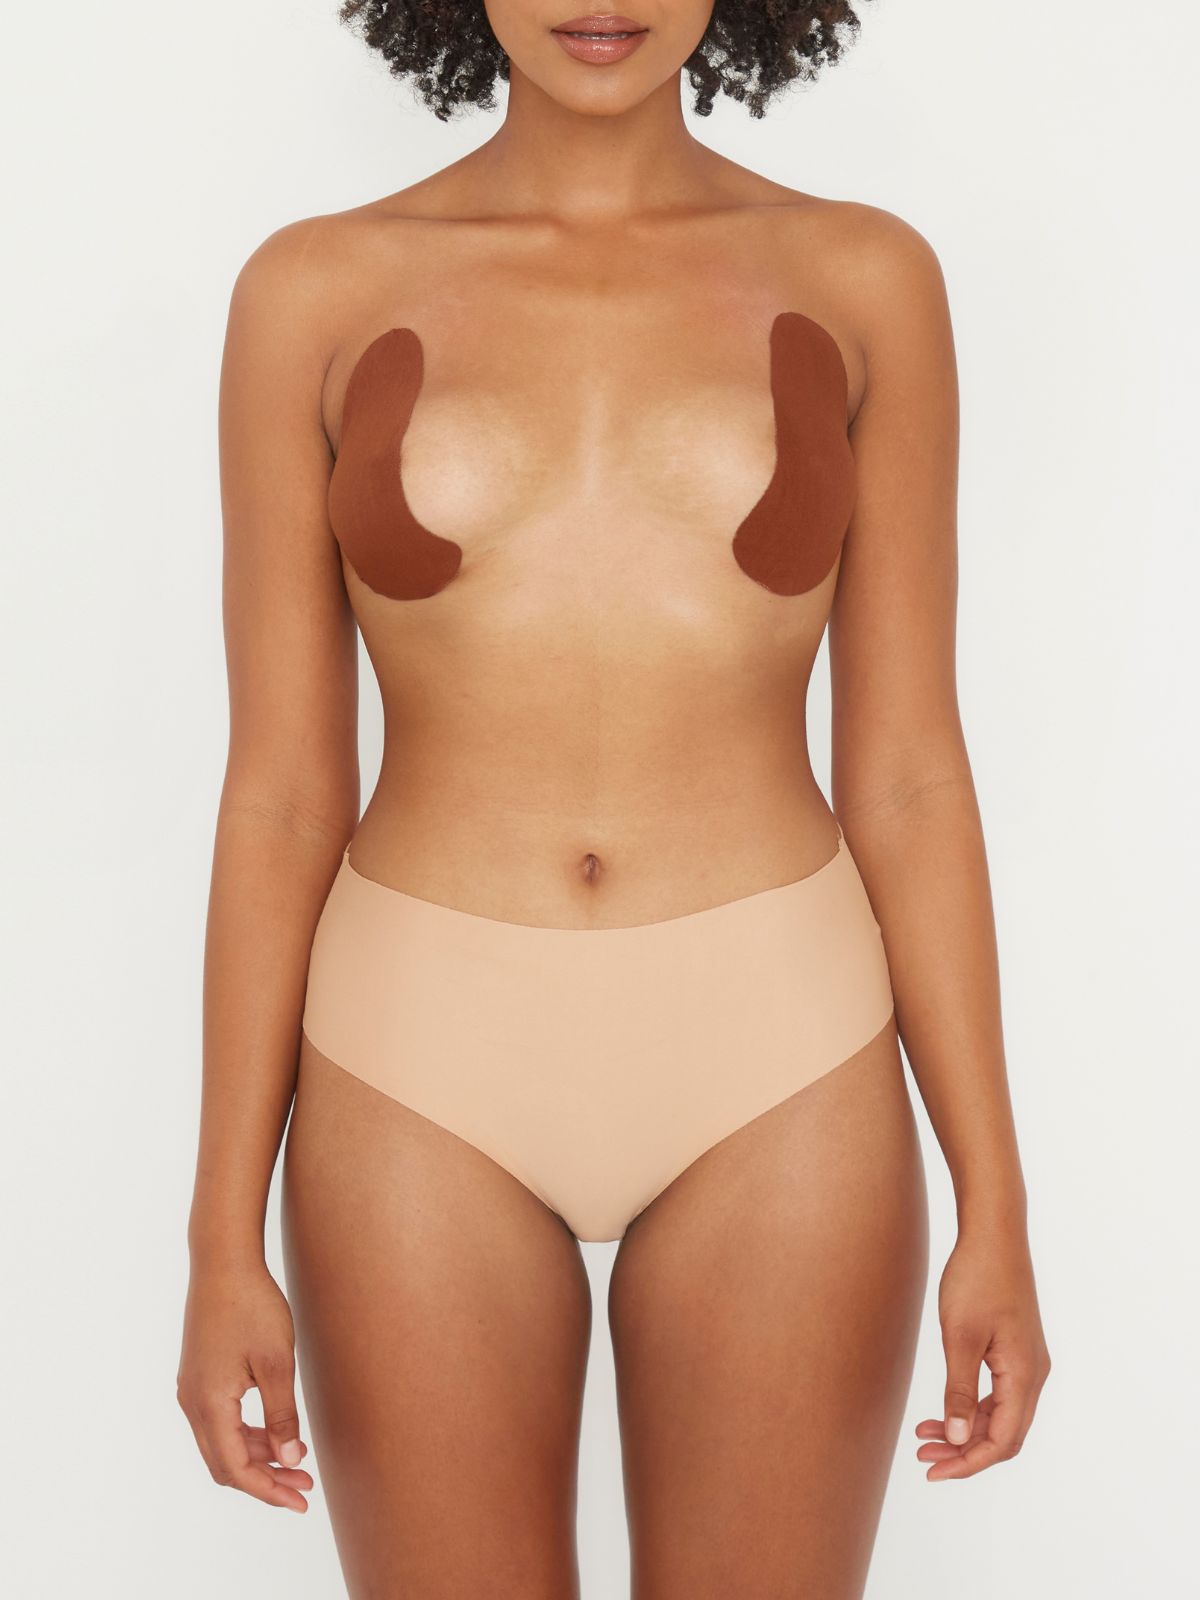 Original Lift and Shape Tape by Perky Pear / Brown